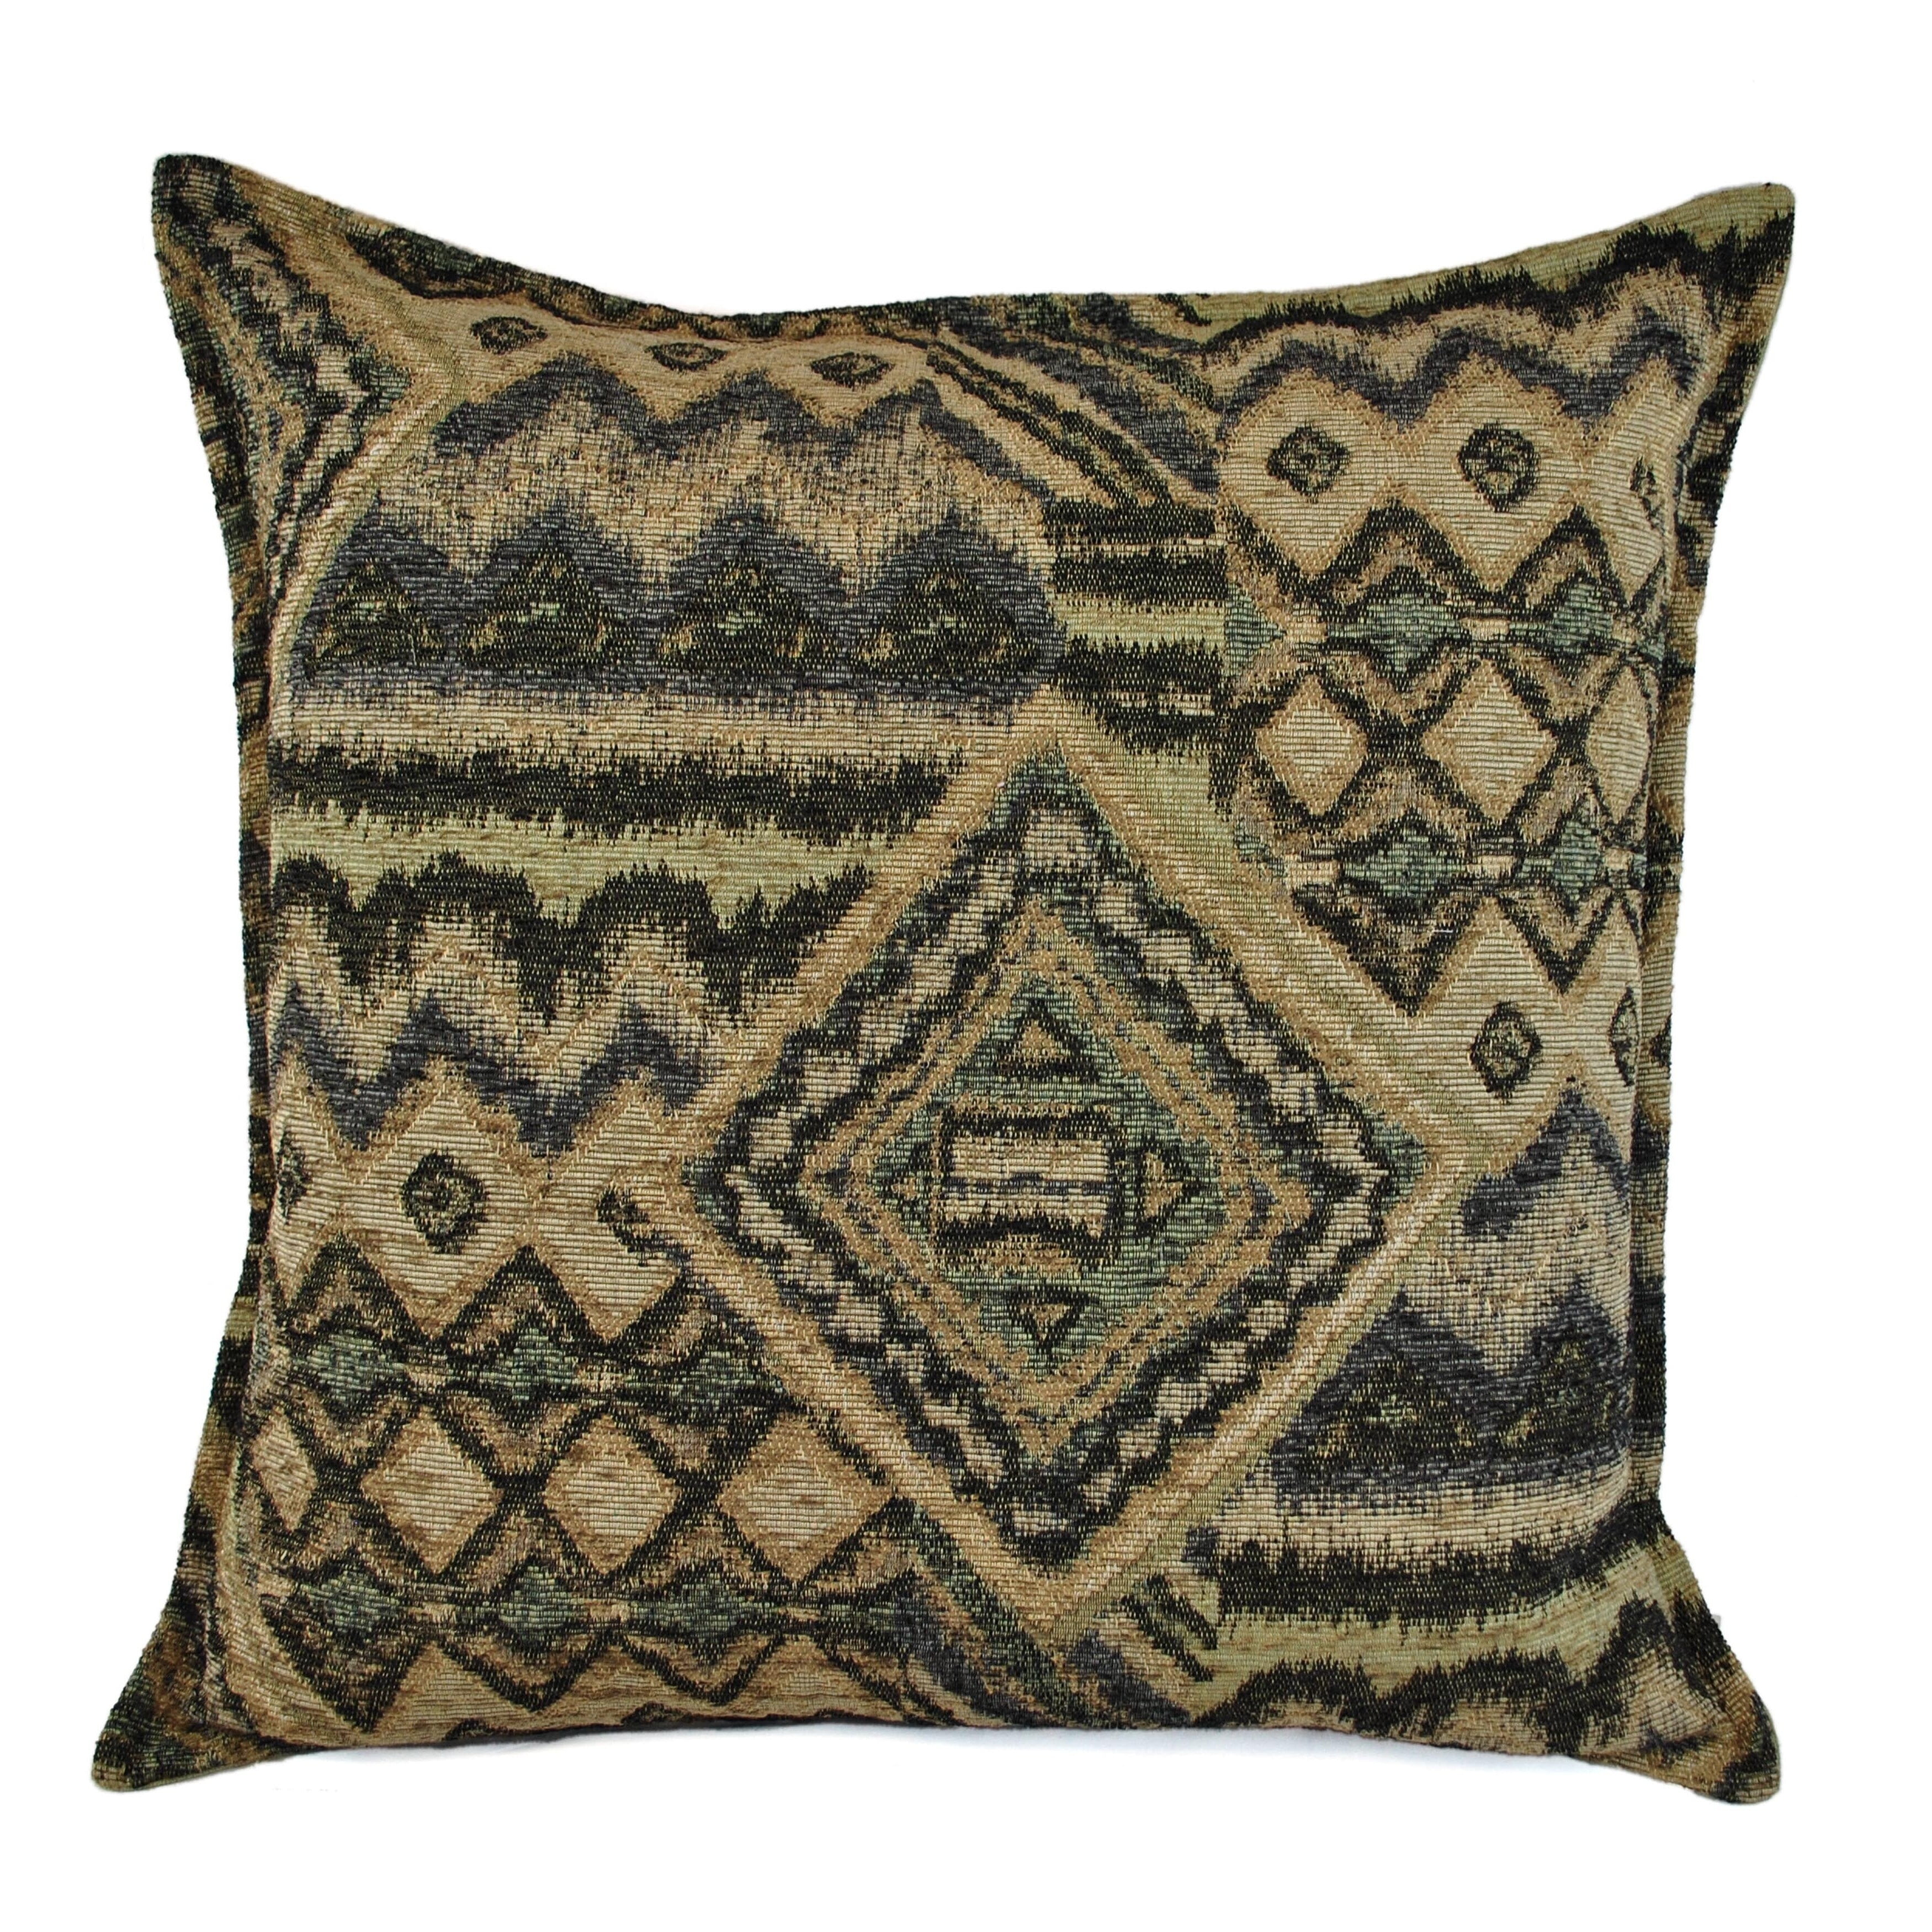 Stunning down filled 20 inch throw pillows